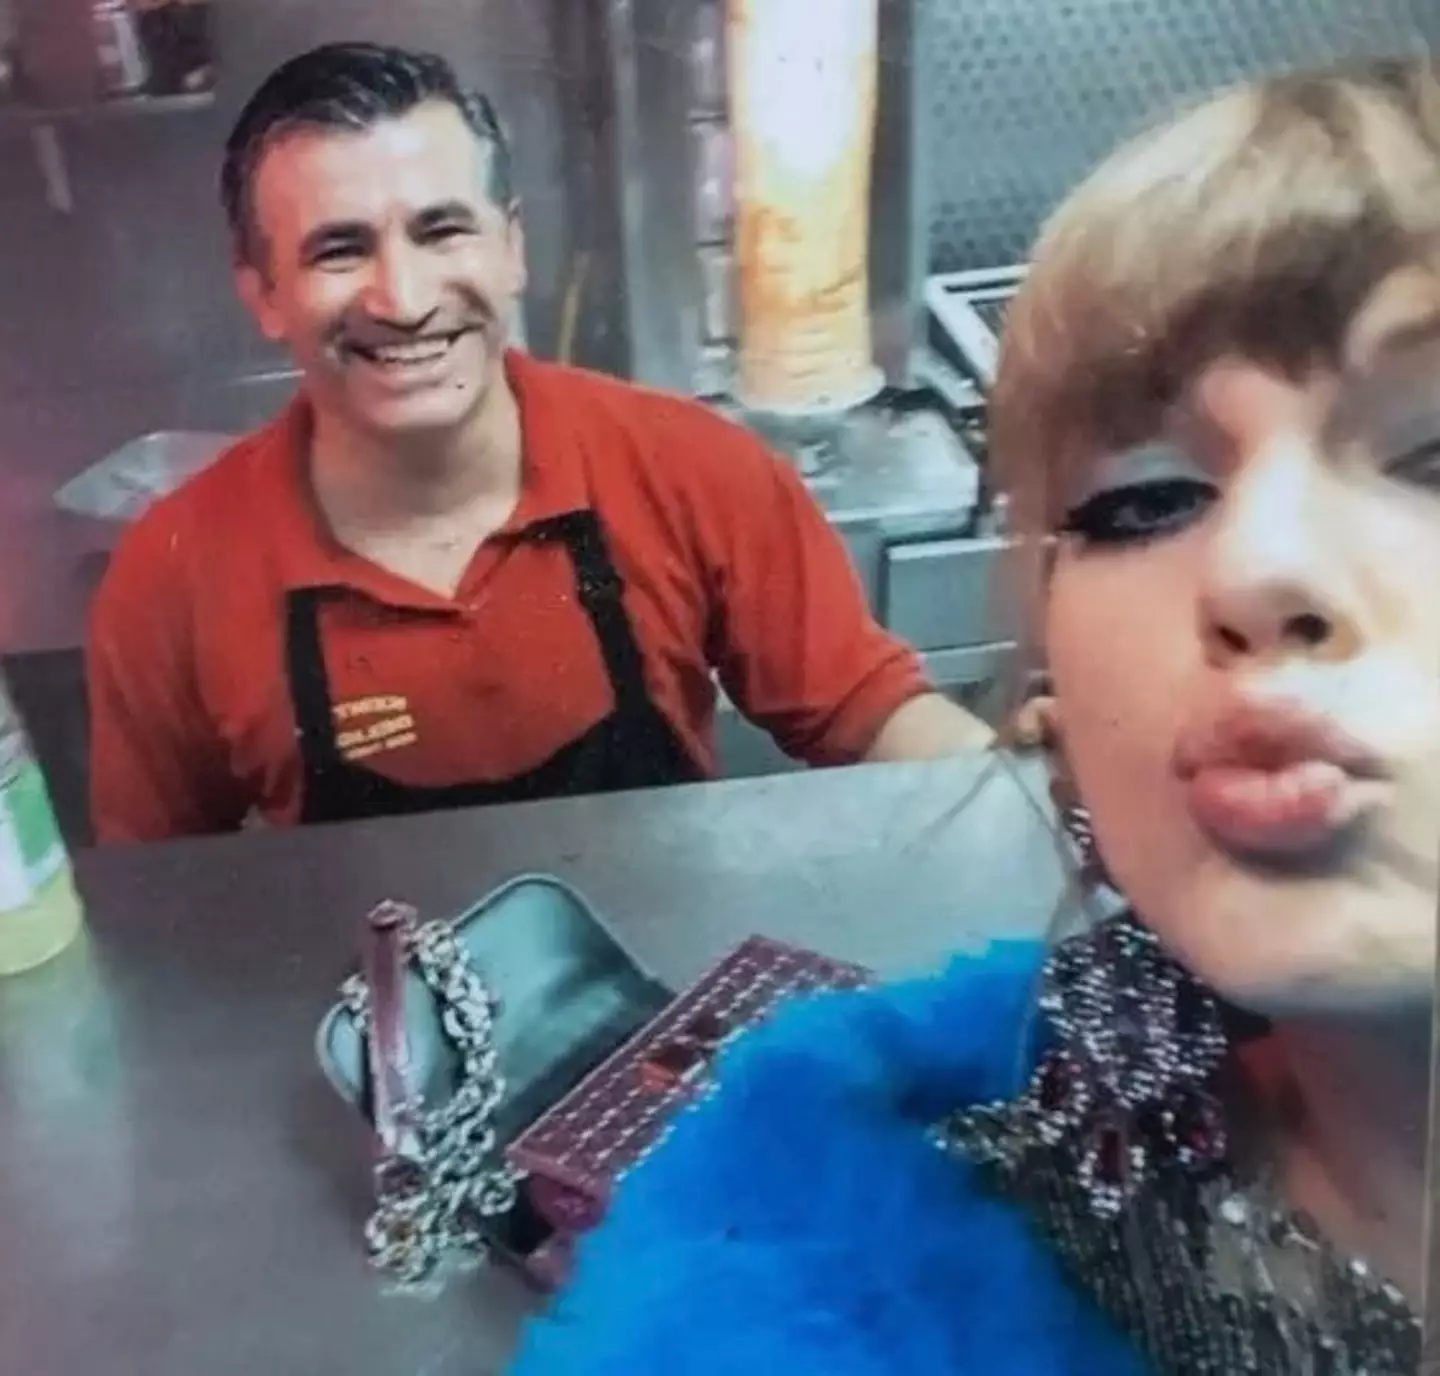 Taylor Swift took a selfie inside Kentish Delight on a previous trip to London (Instagram/@taylor.loverrr1989)